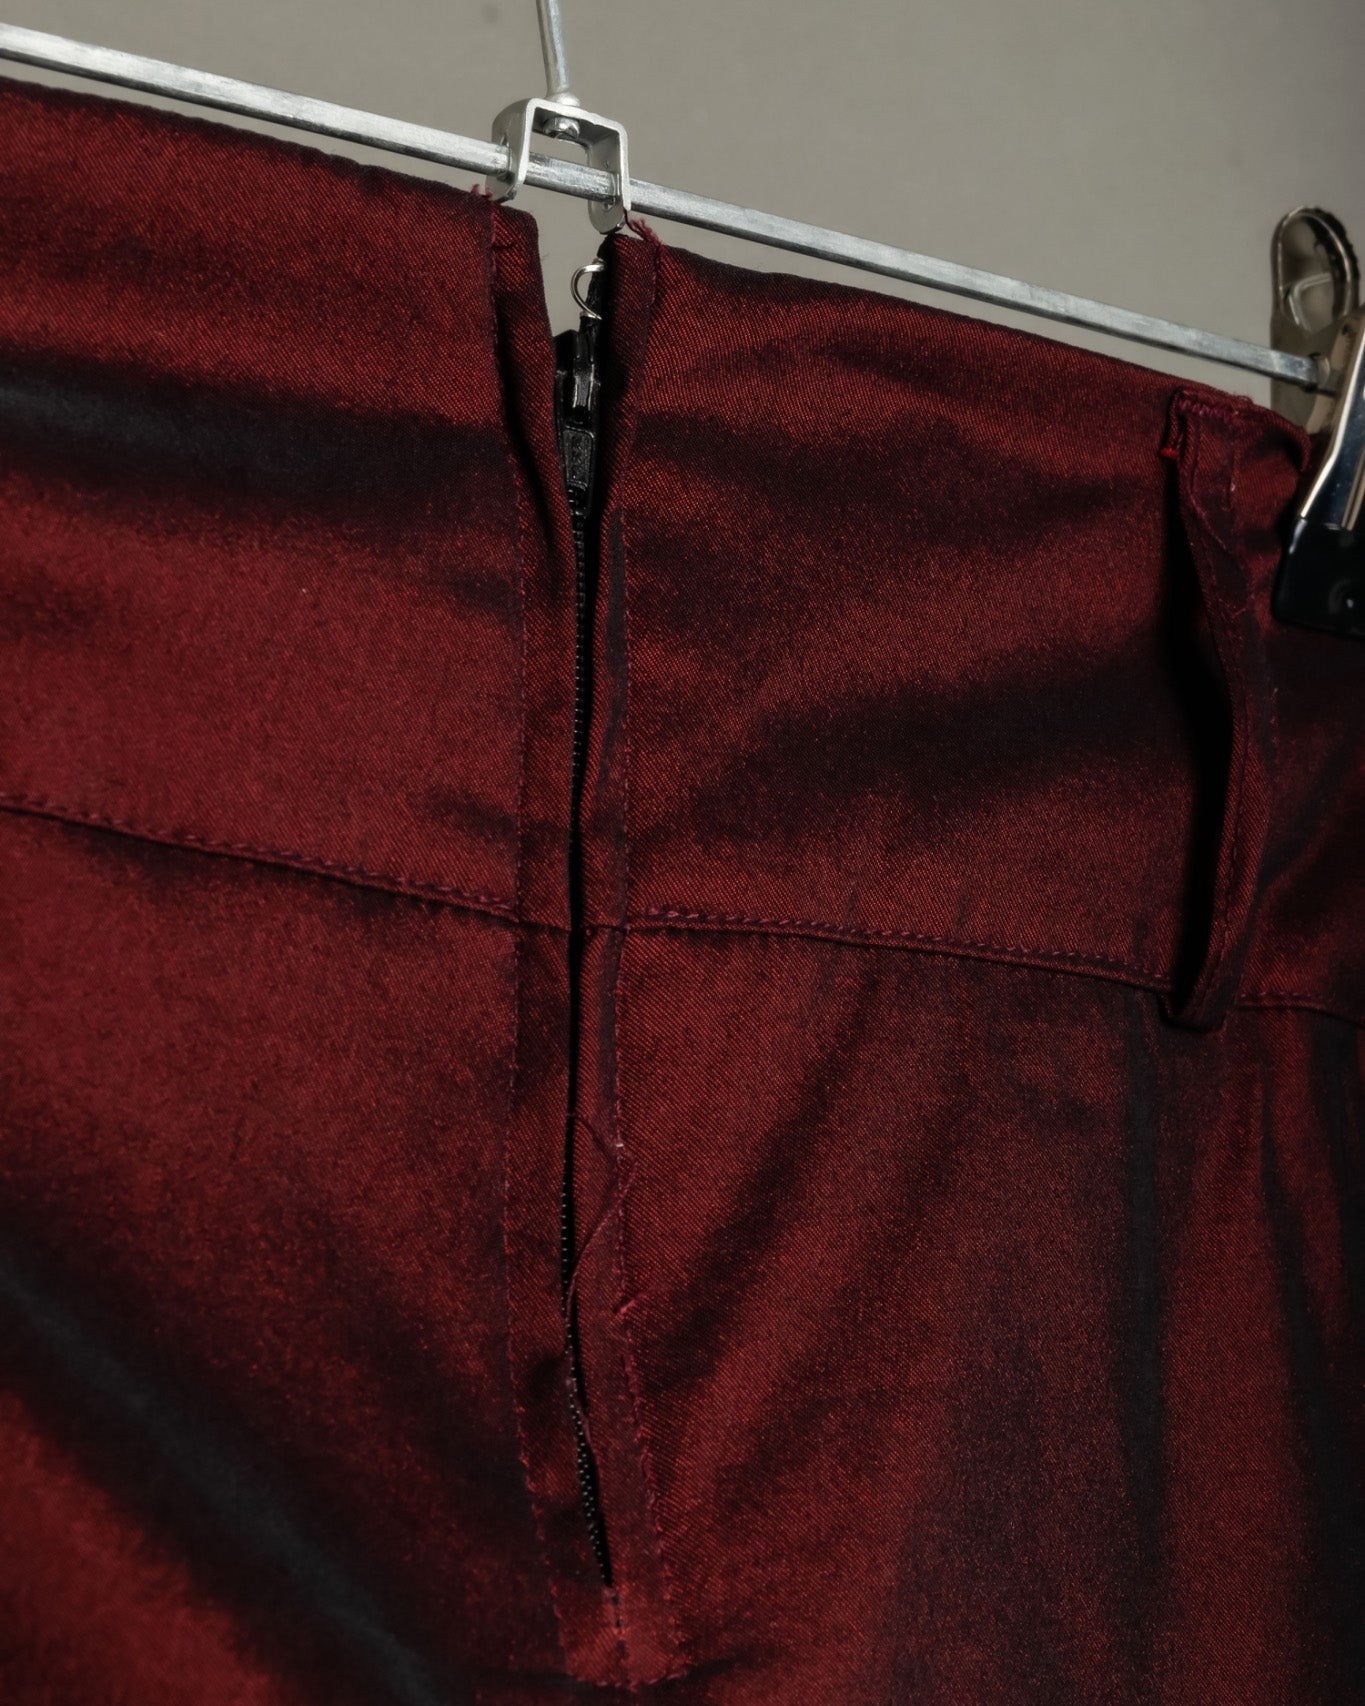 Super Bell Bottom Glossy Red Pants